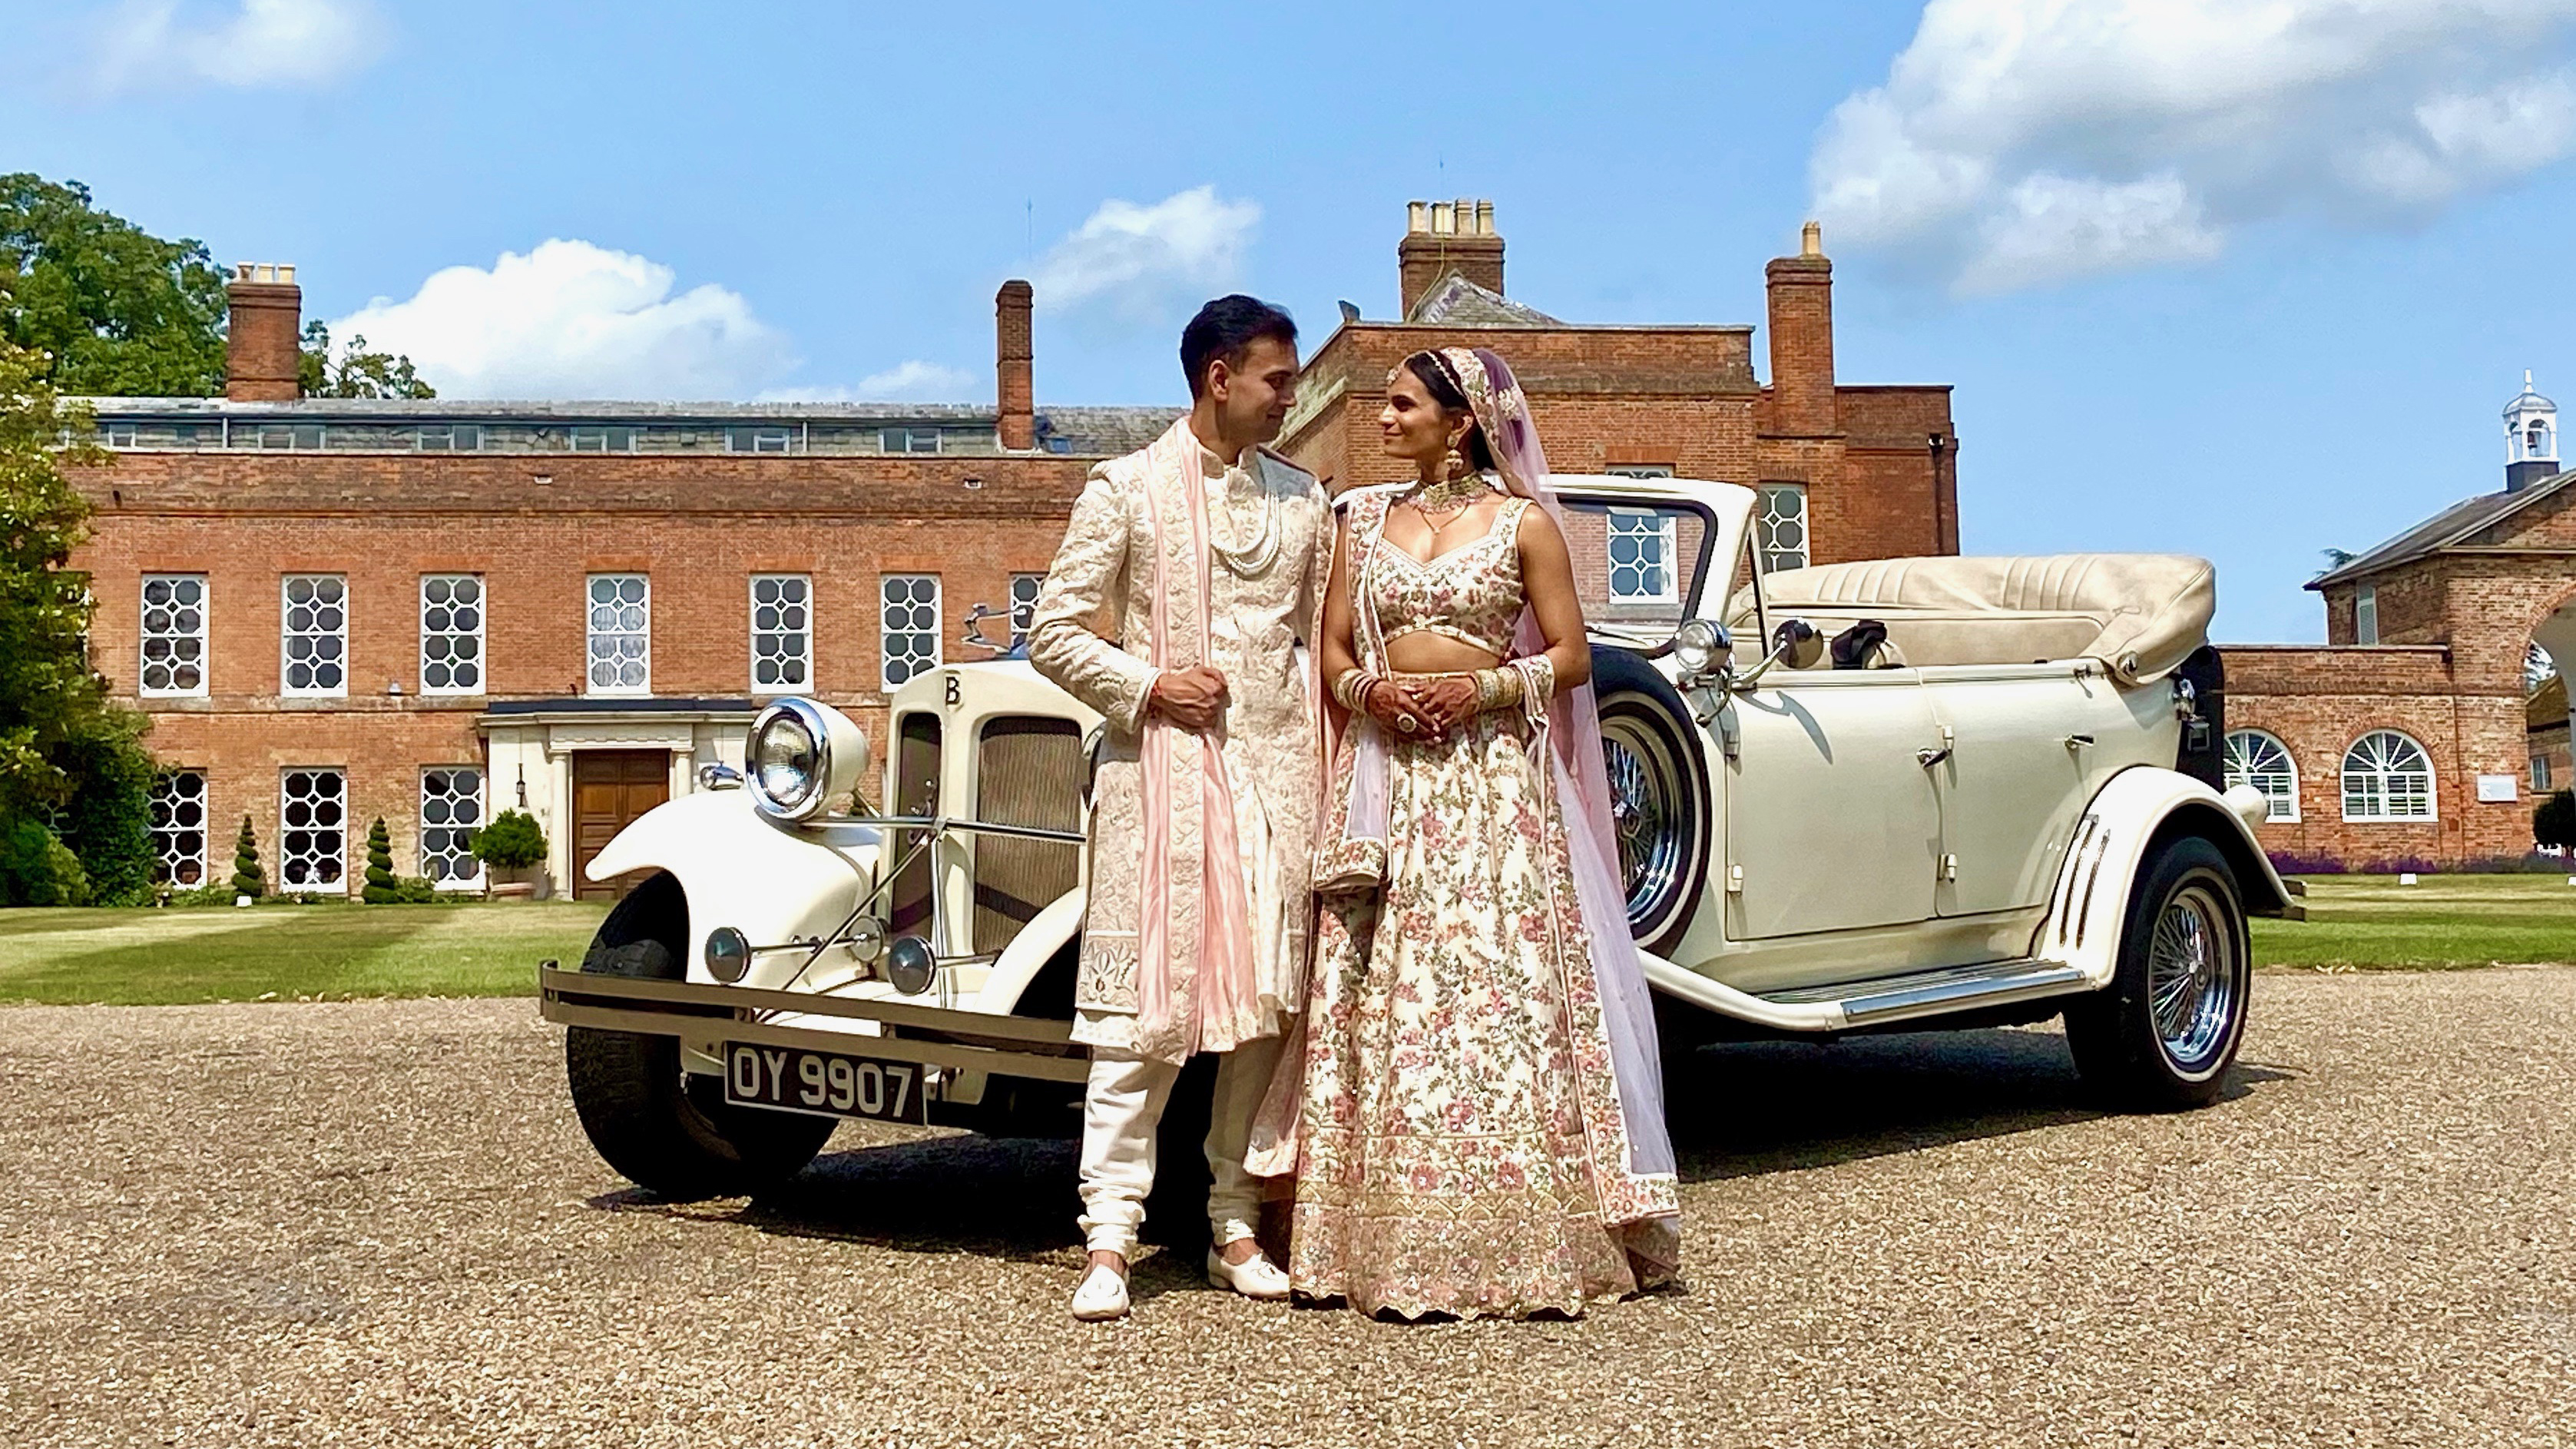 Convertible vintage style Beauford with roof down with newly wed Asian couple standing in front of the vehicle looking at each others. Vehicle is parked in front of a large manor house in Hayes